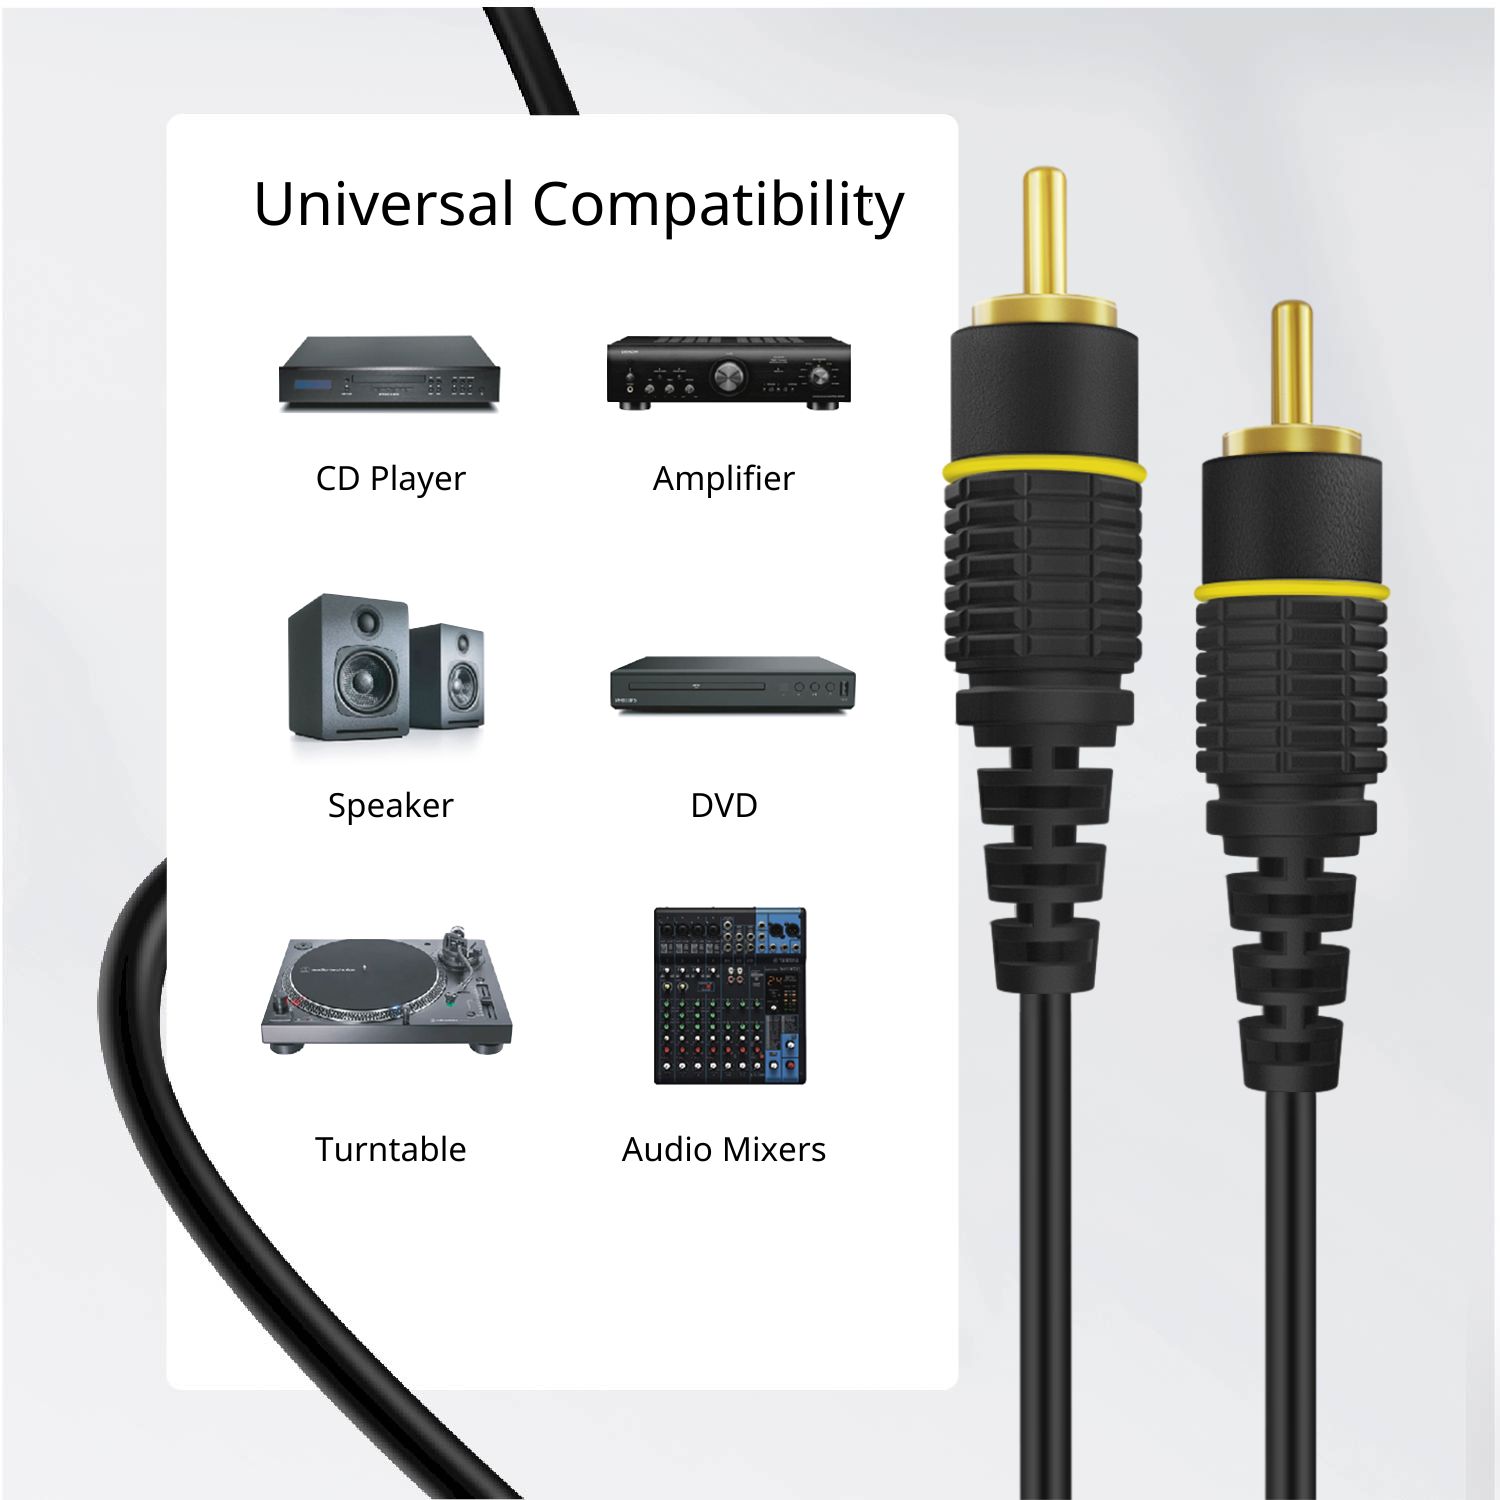 Subwoofer S/PDIF Audio Digital Coaxial RCA Composite Video Cable (3 Feet) - Gold Plated Dual Shielded RCA to RCA Male Connectors - Black - image 5 of 6